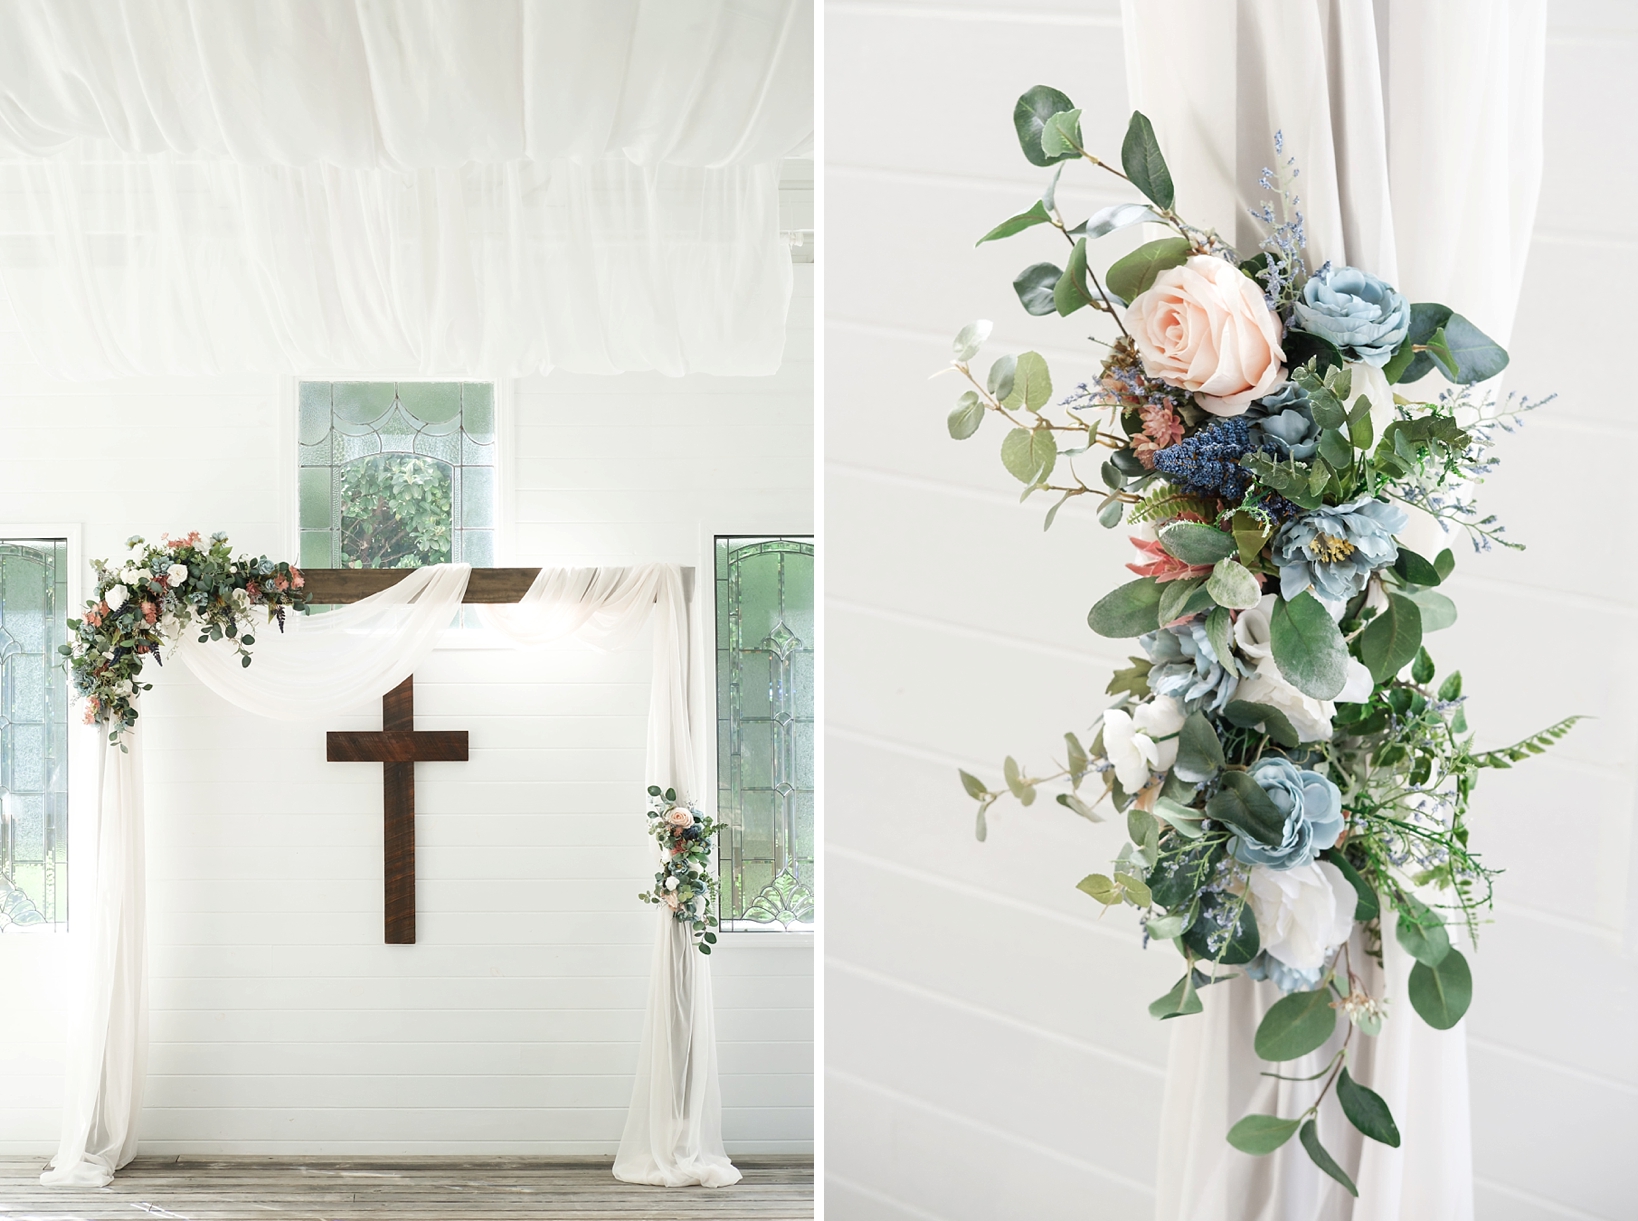 Wedding ceremony details including a large wooden arch and cross as well as large floral decor